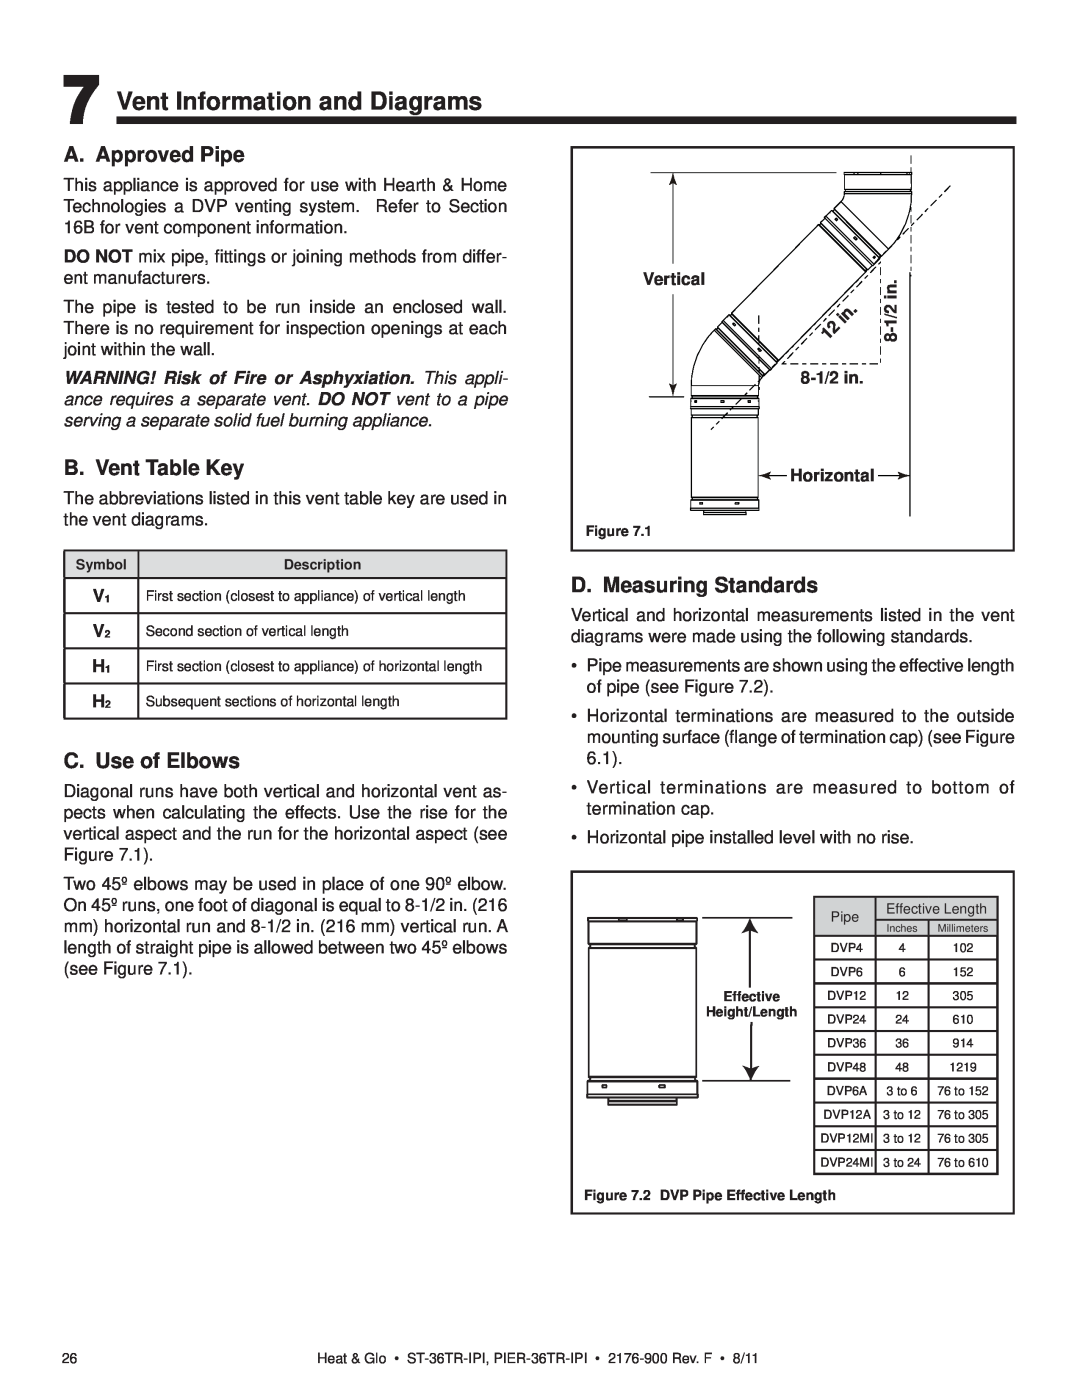 Heat & Glo LifeStyle ST-36TRLP-IPI Vent Information and Diagrams, A. Approved Pipe, B. Vent Table Key, C. Use of Elbows 